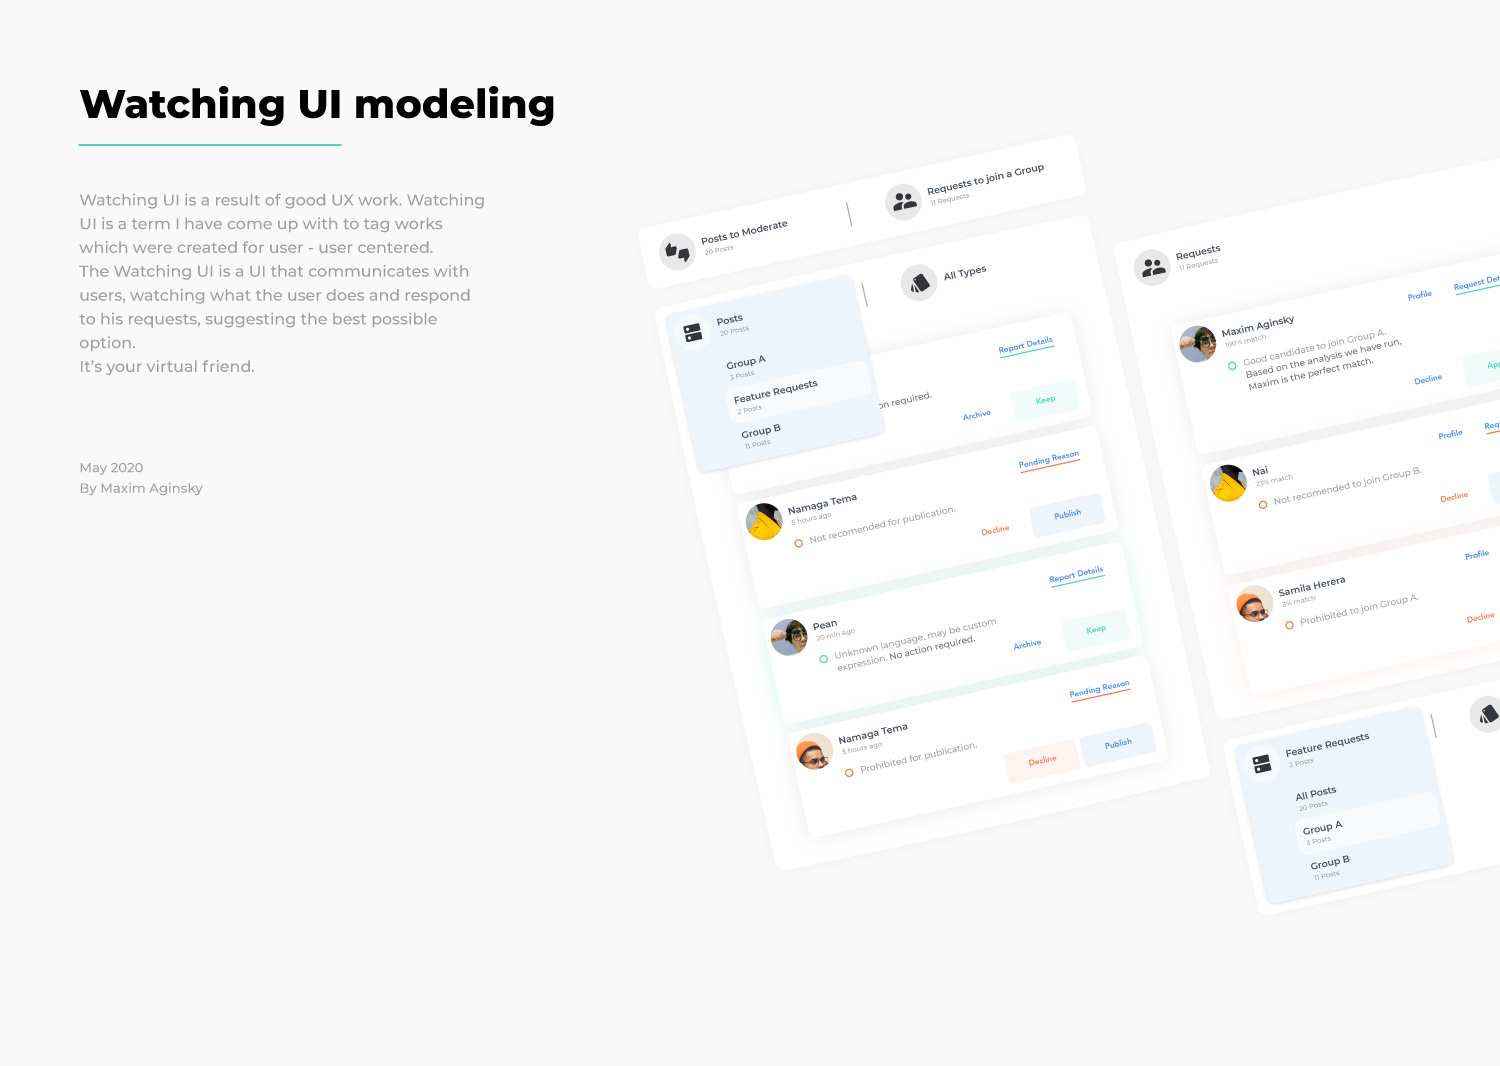 Analyse and model basic UI that will help Admins to filter posts by group and type